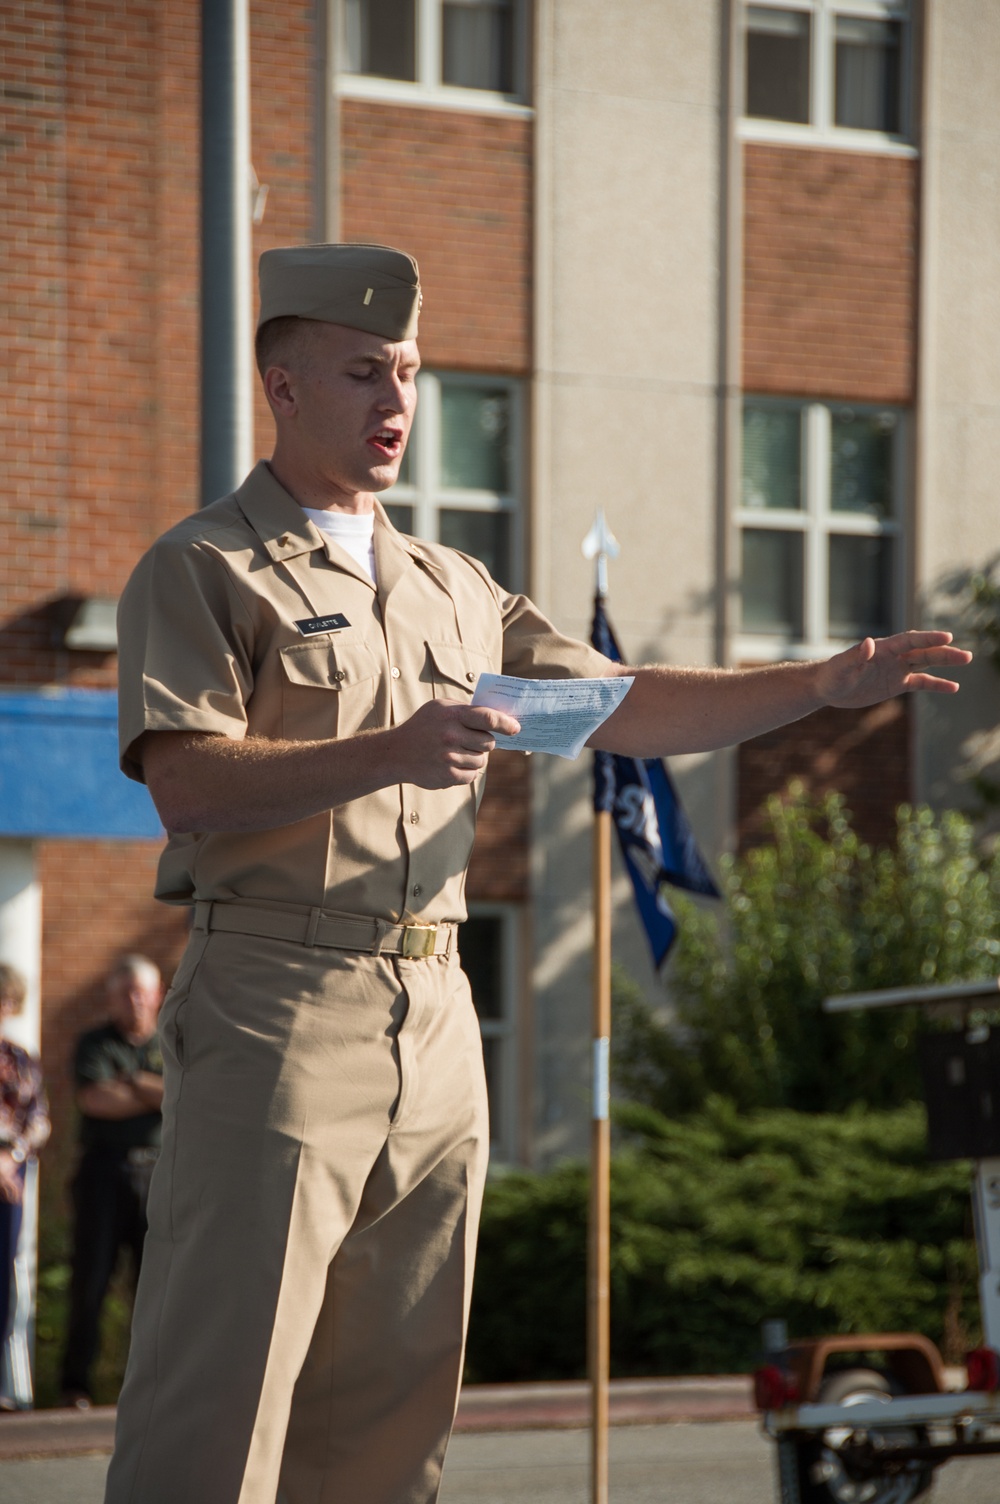 190808-N-TE695-0008 NEWPORT, R.I. (Aug. 8, 2019) – Ensign Matthew D. Civilette, with graduating class 19050 of Officer Development School (ODS) here at Officer Training Command, Newport, Rhode Island, reads ‘My Name is Old Glory’ poem on Aug. 8, 2019.